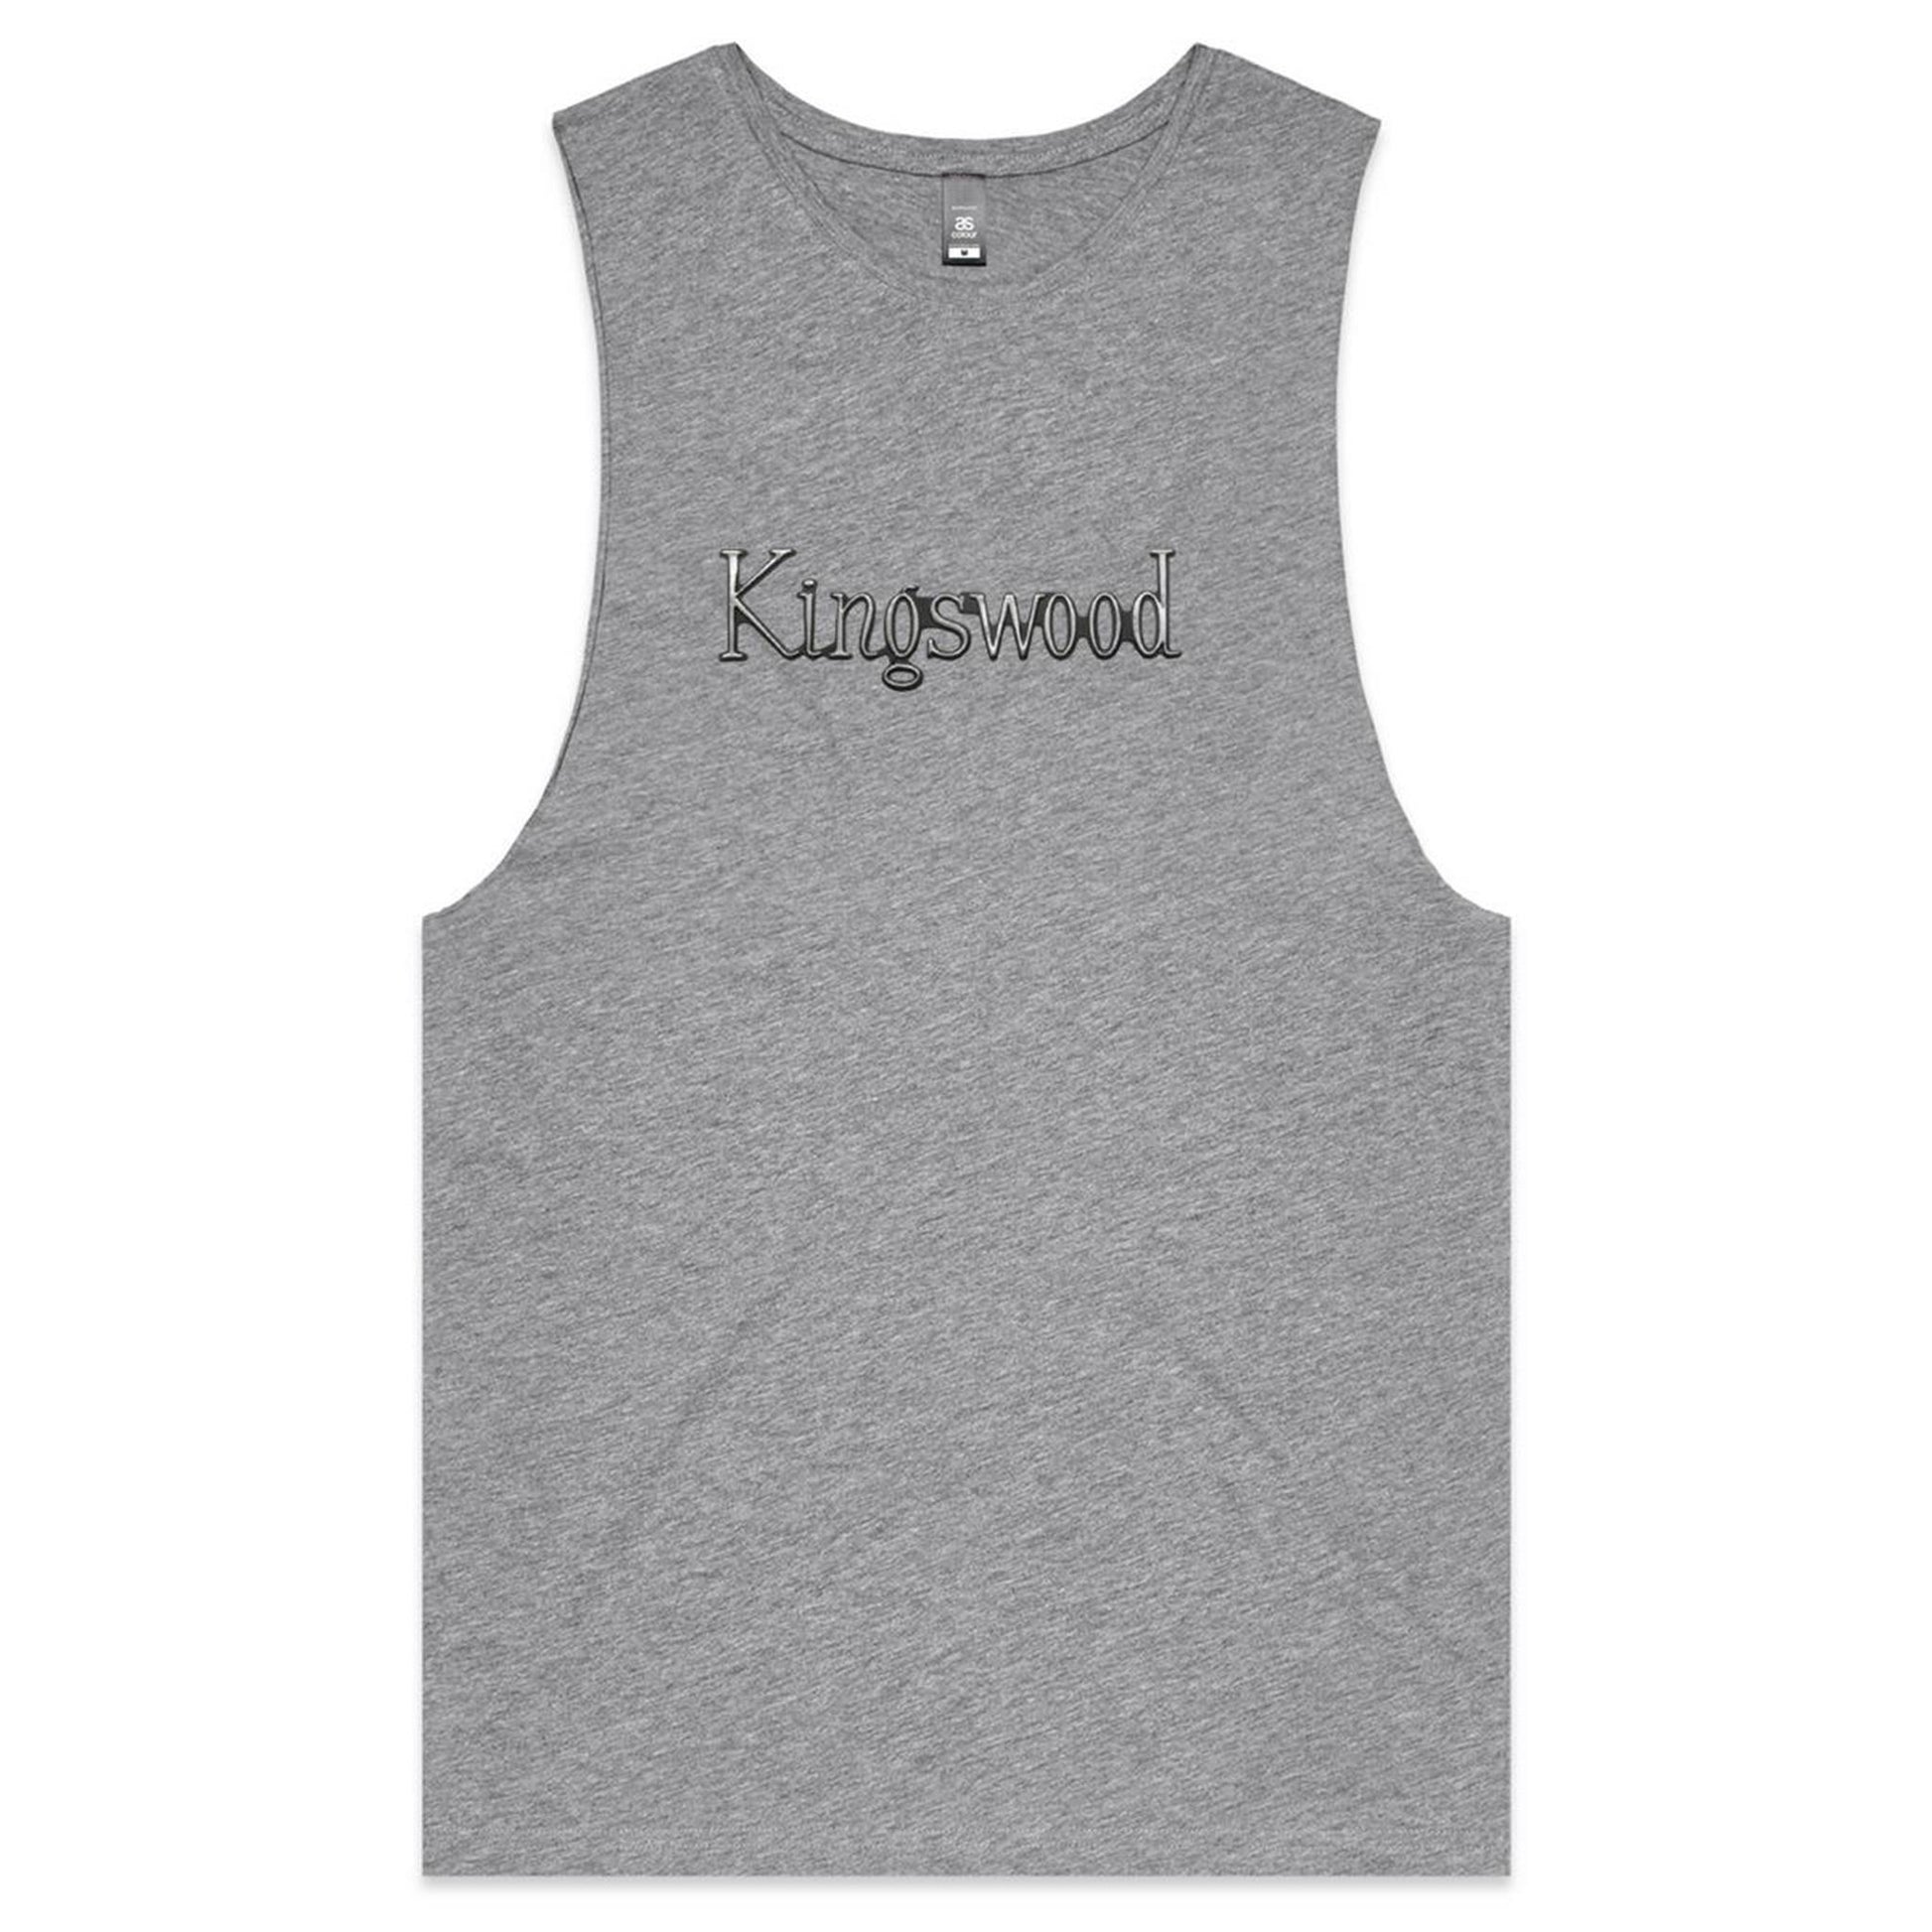 Holden Kingswood - Mens Tank Top Tee - Shed Shirts